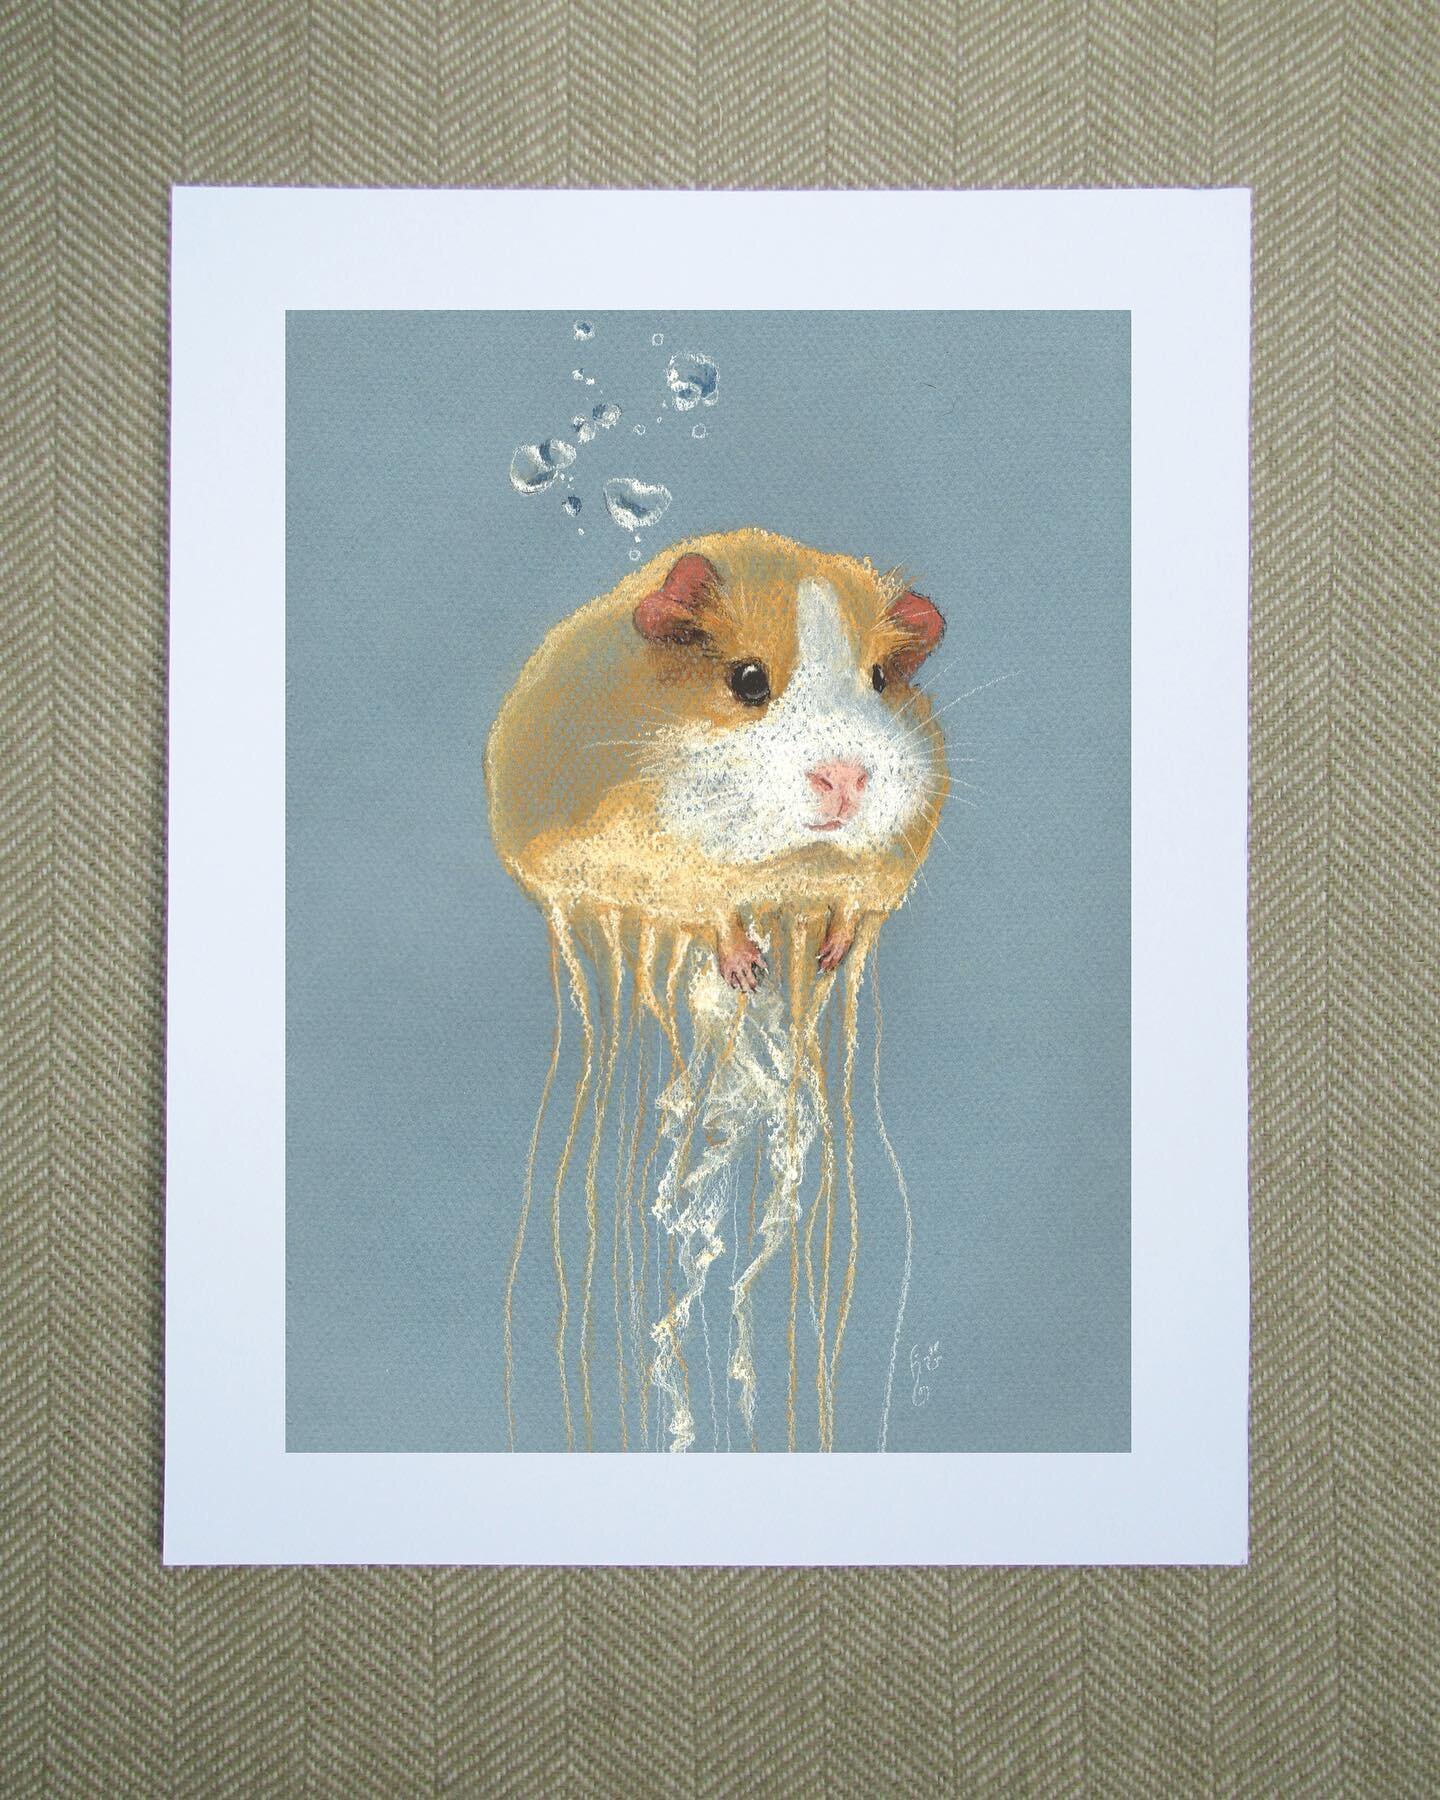 Coming soon! A bunch of new prints are coming soon to my website including these!
Jelly-pig, Firesquirrel, Cowpunk, and Sealion. Stay tuned for more updates.
.
.
#guineapig #jellyfish #squirrel #sealion #cow #punk #prints #drawing #pastel #nupastel #